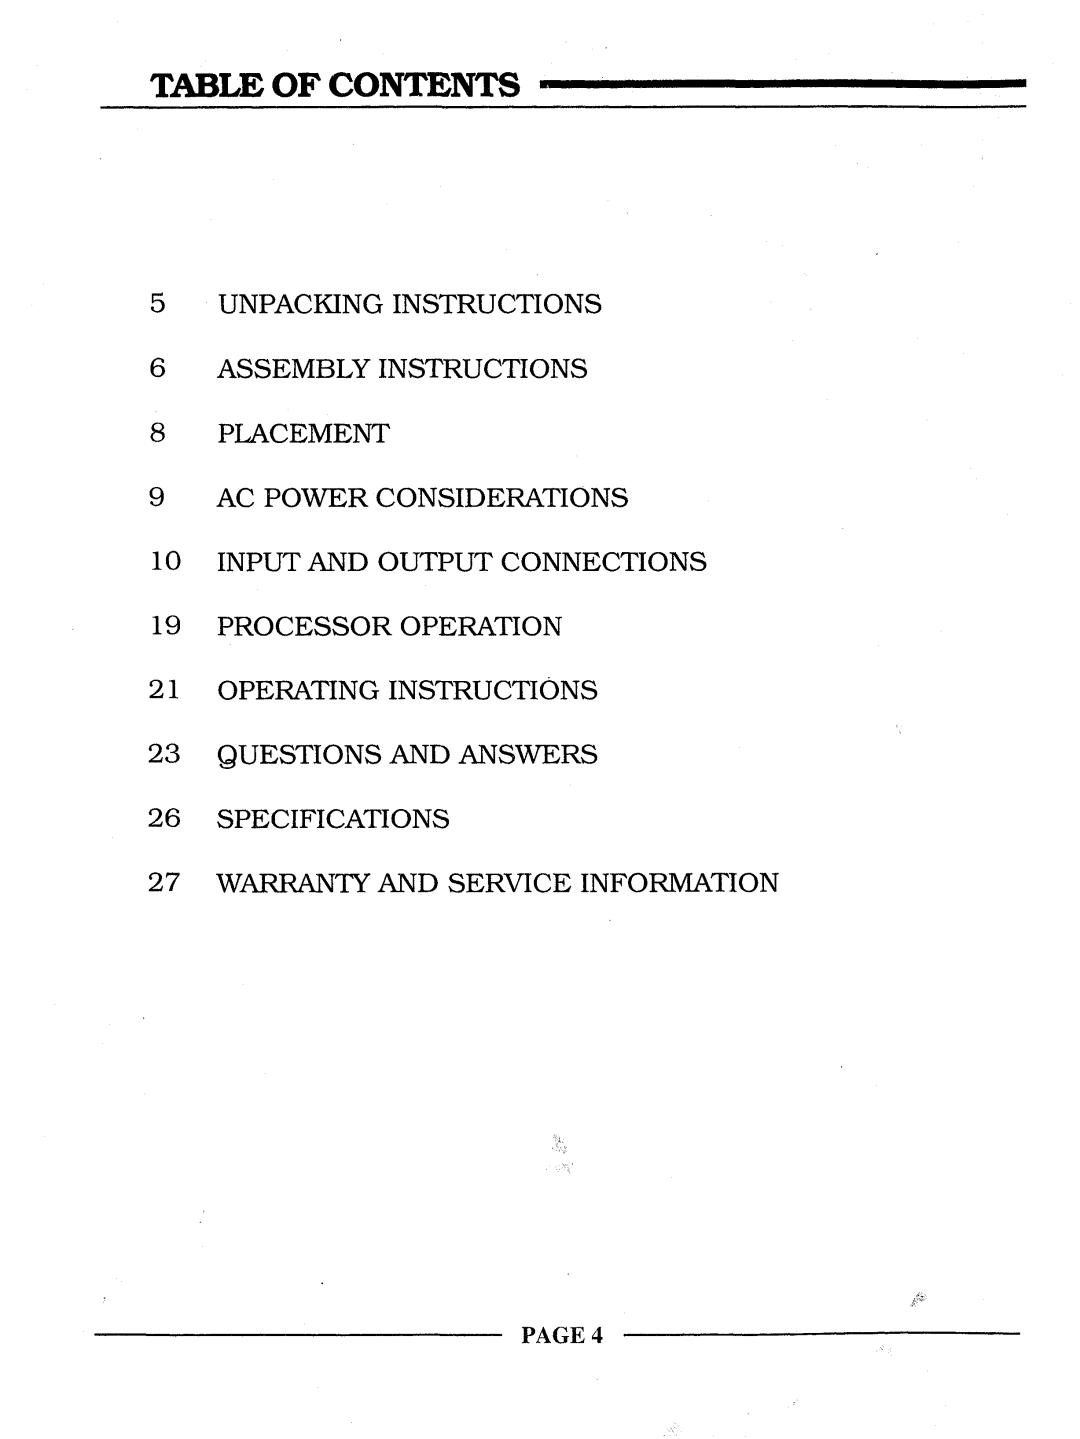 Krell Industries REFERENCE 64 manual Table Of Contents, PAGE4 